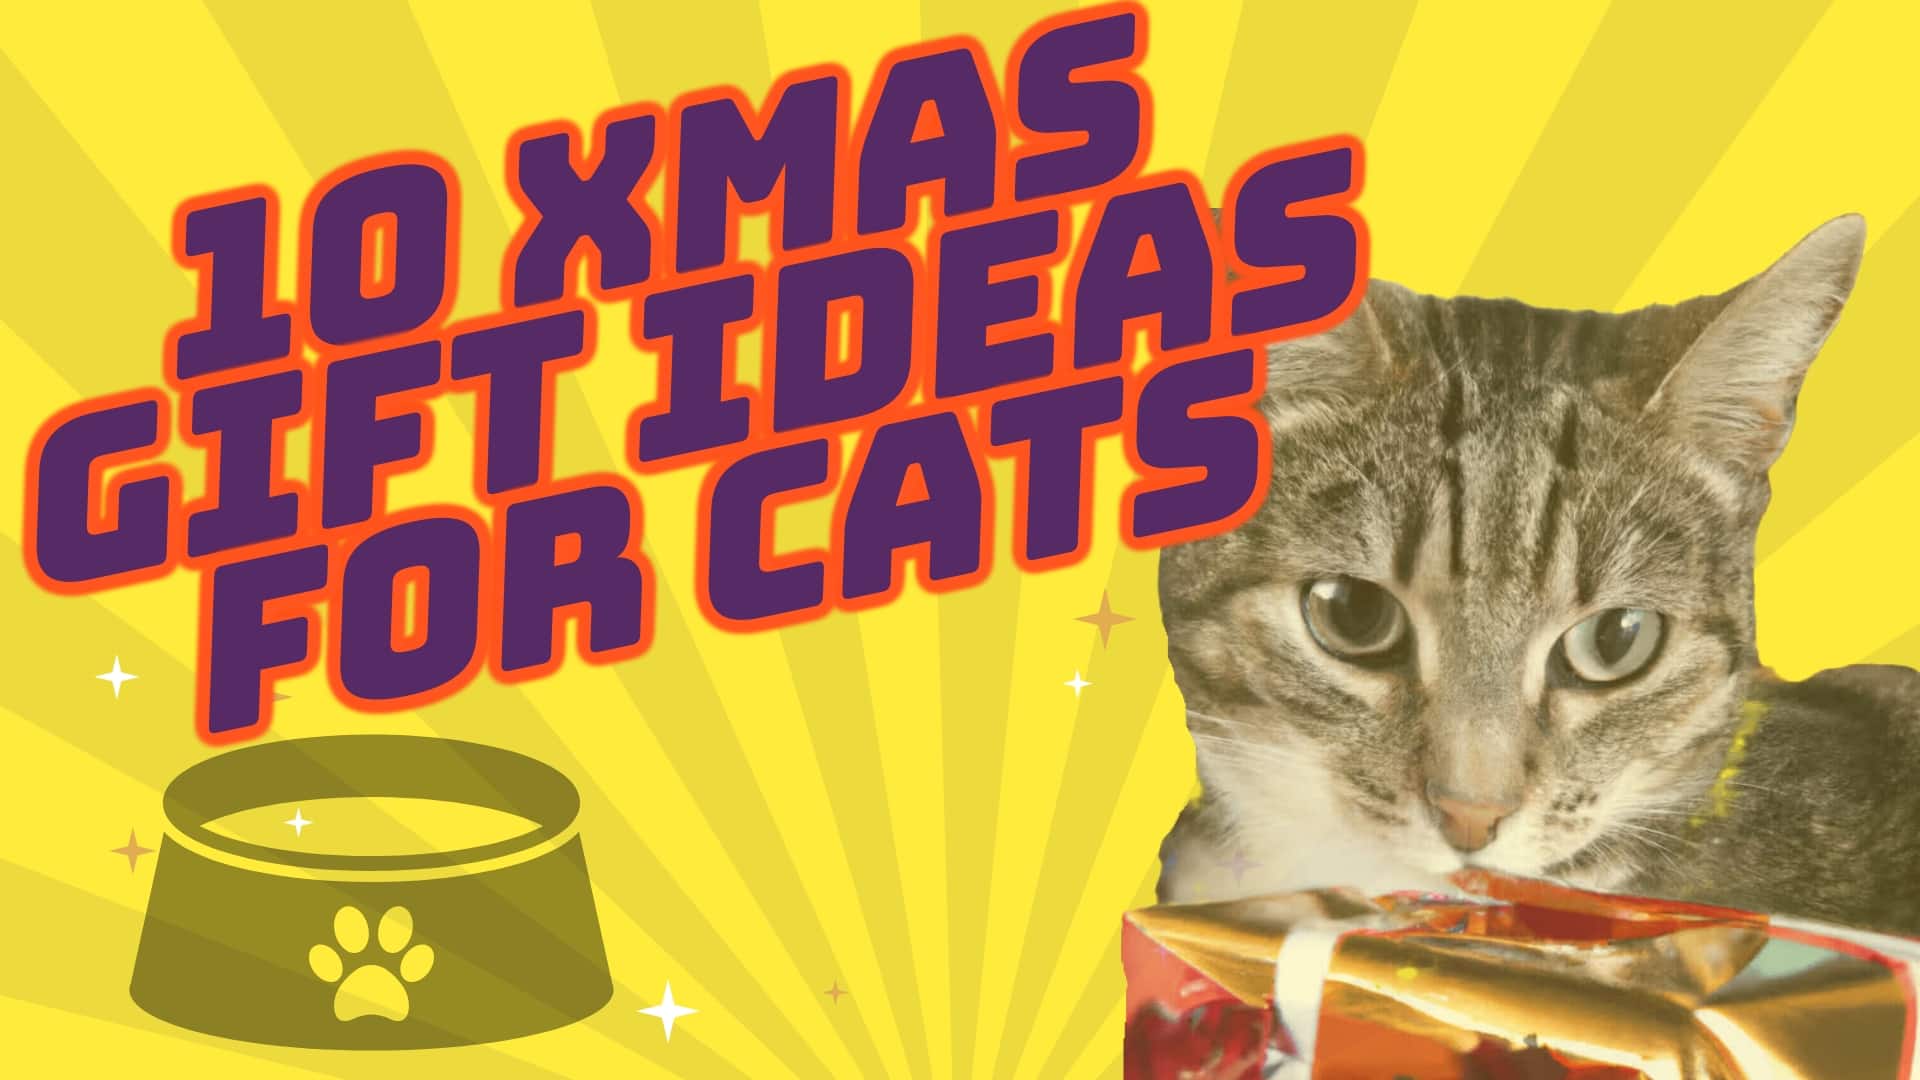 Purrfect Presents: 10 Christmas Gifts Ideas for Your Feline Friend in 2023